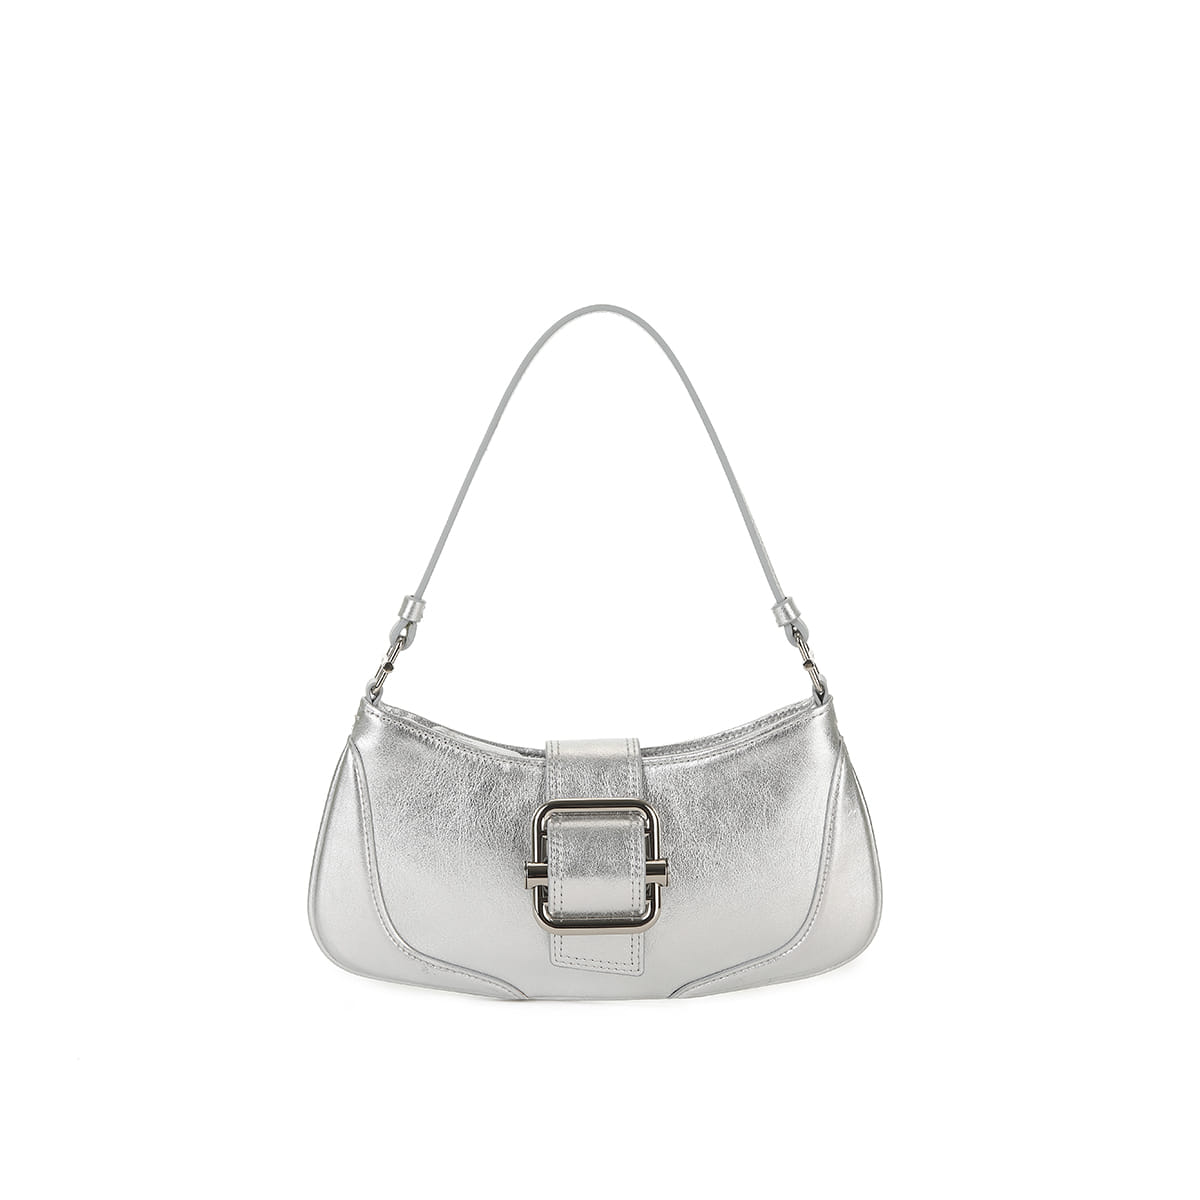 SHOULDER BROCLE SMALL - SILVER